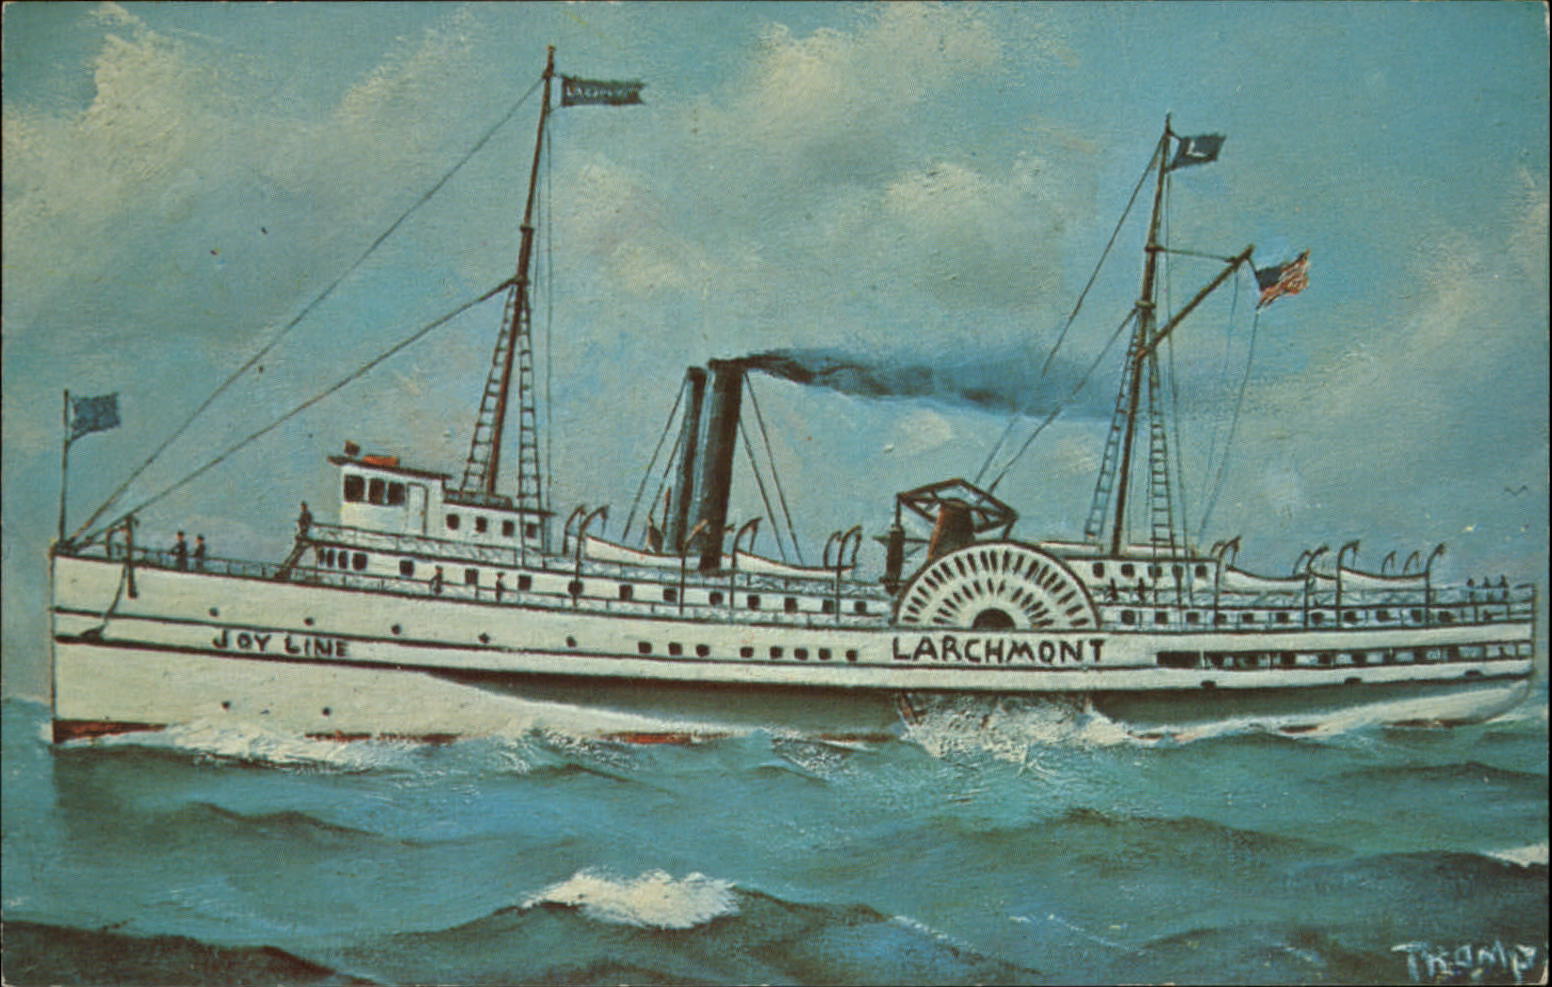 Joy Line steamship LARCHMONT ~ art postcard from painting by Ellery Thompson